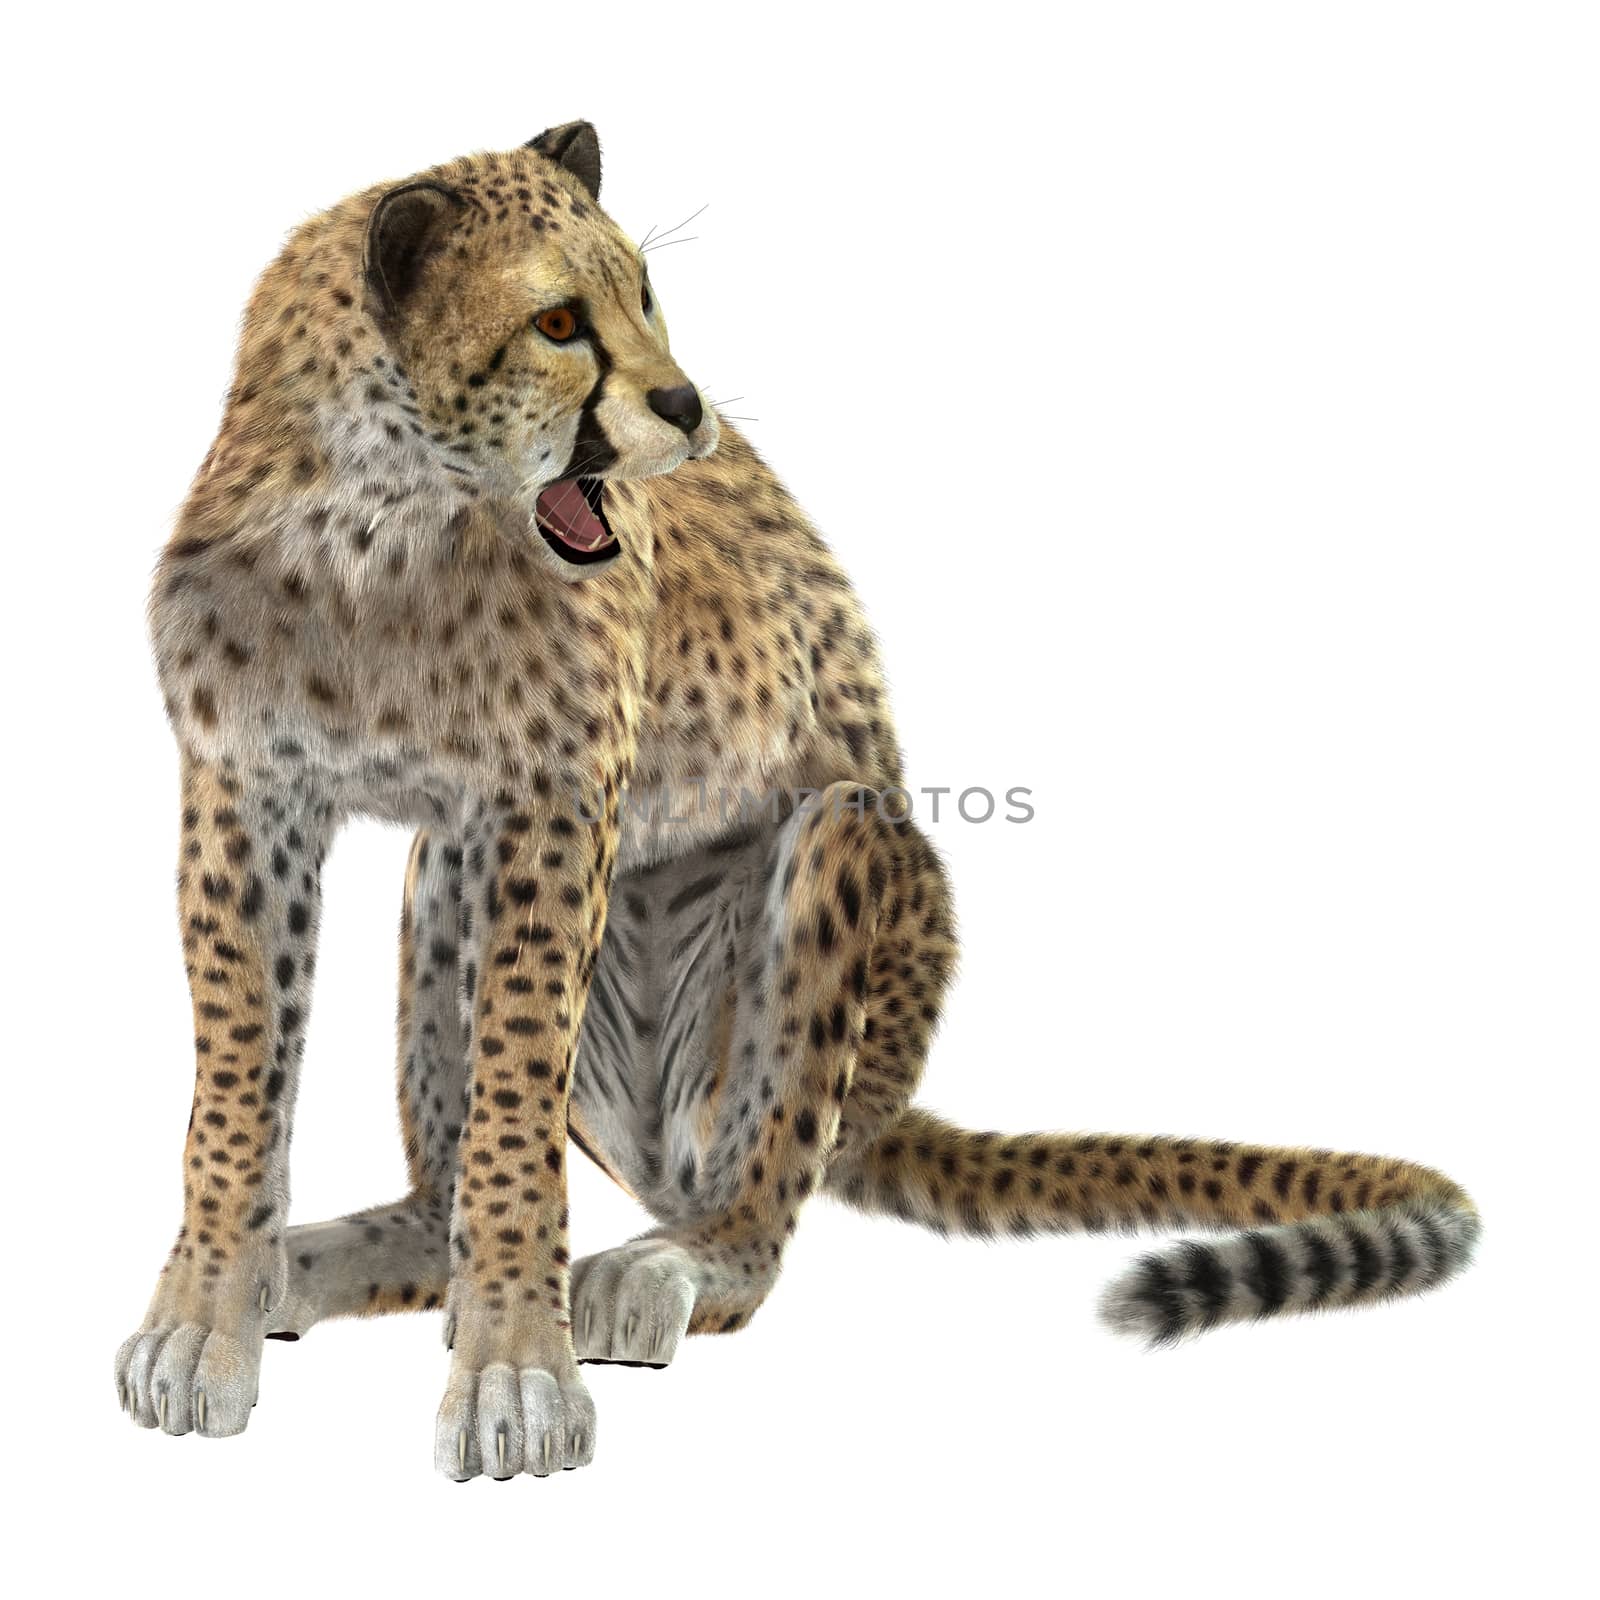 3D digital render of a cheetah isolated on white background